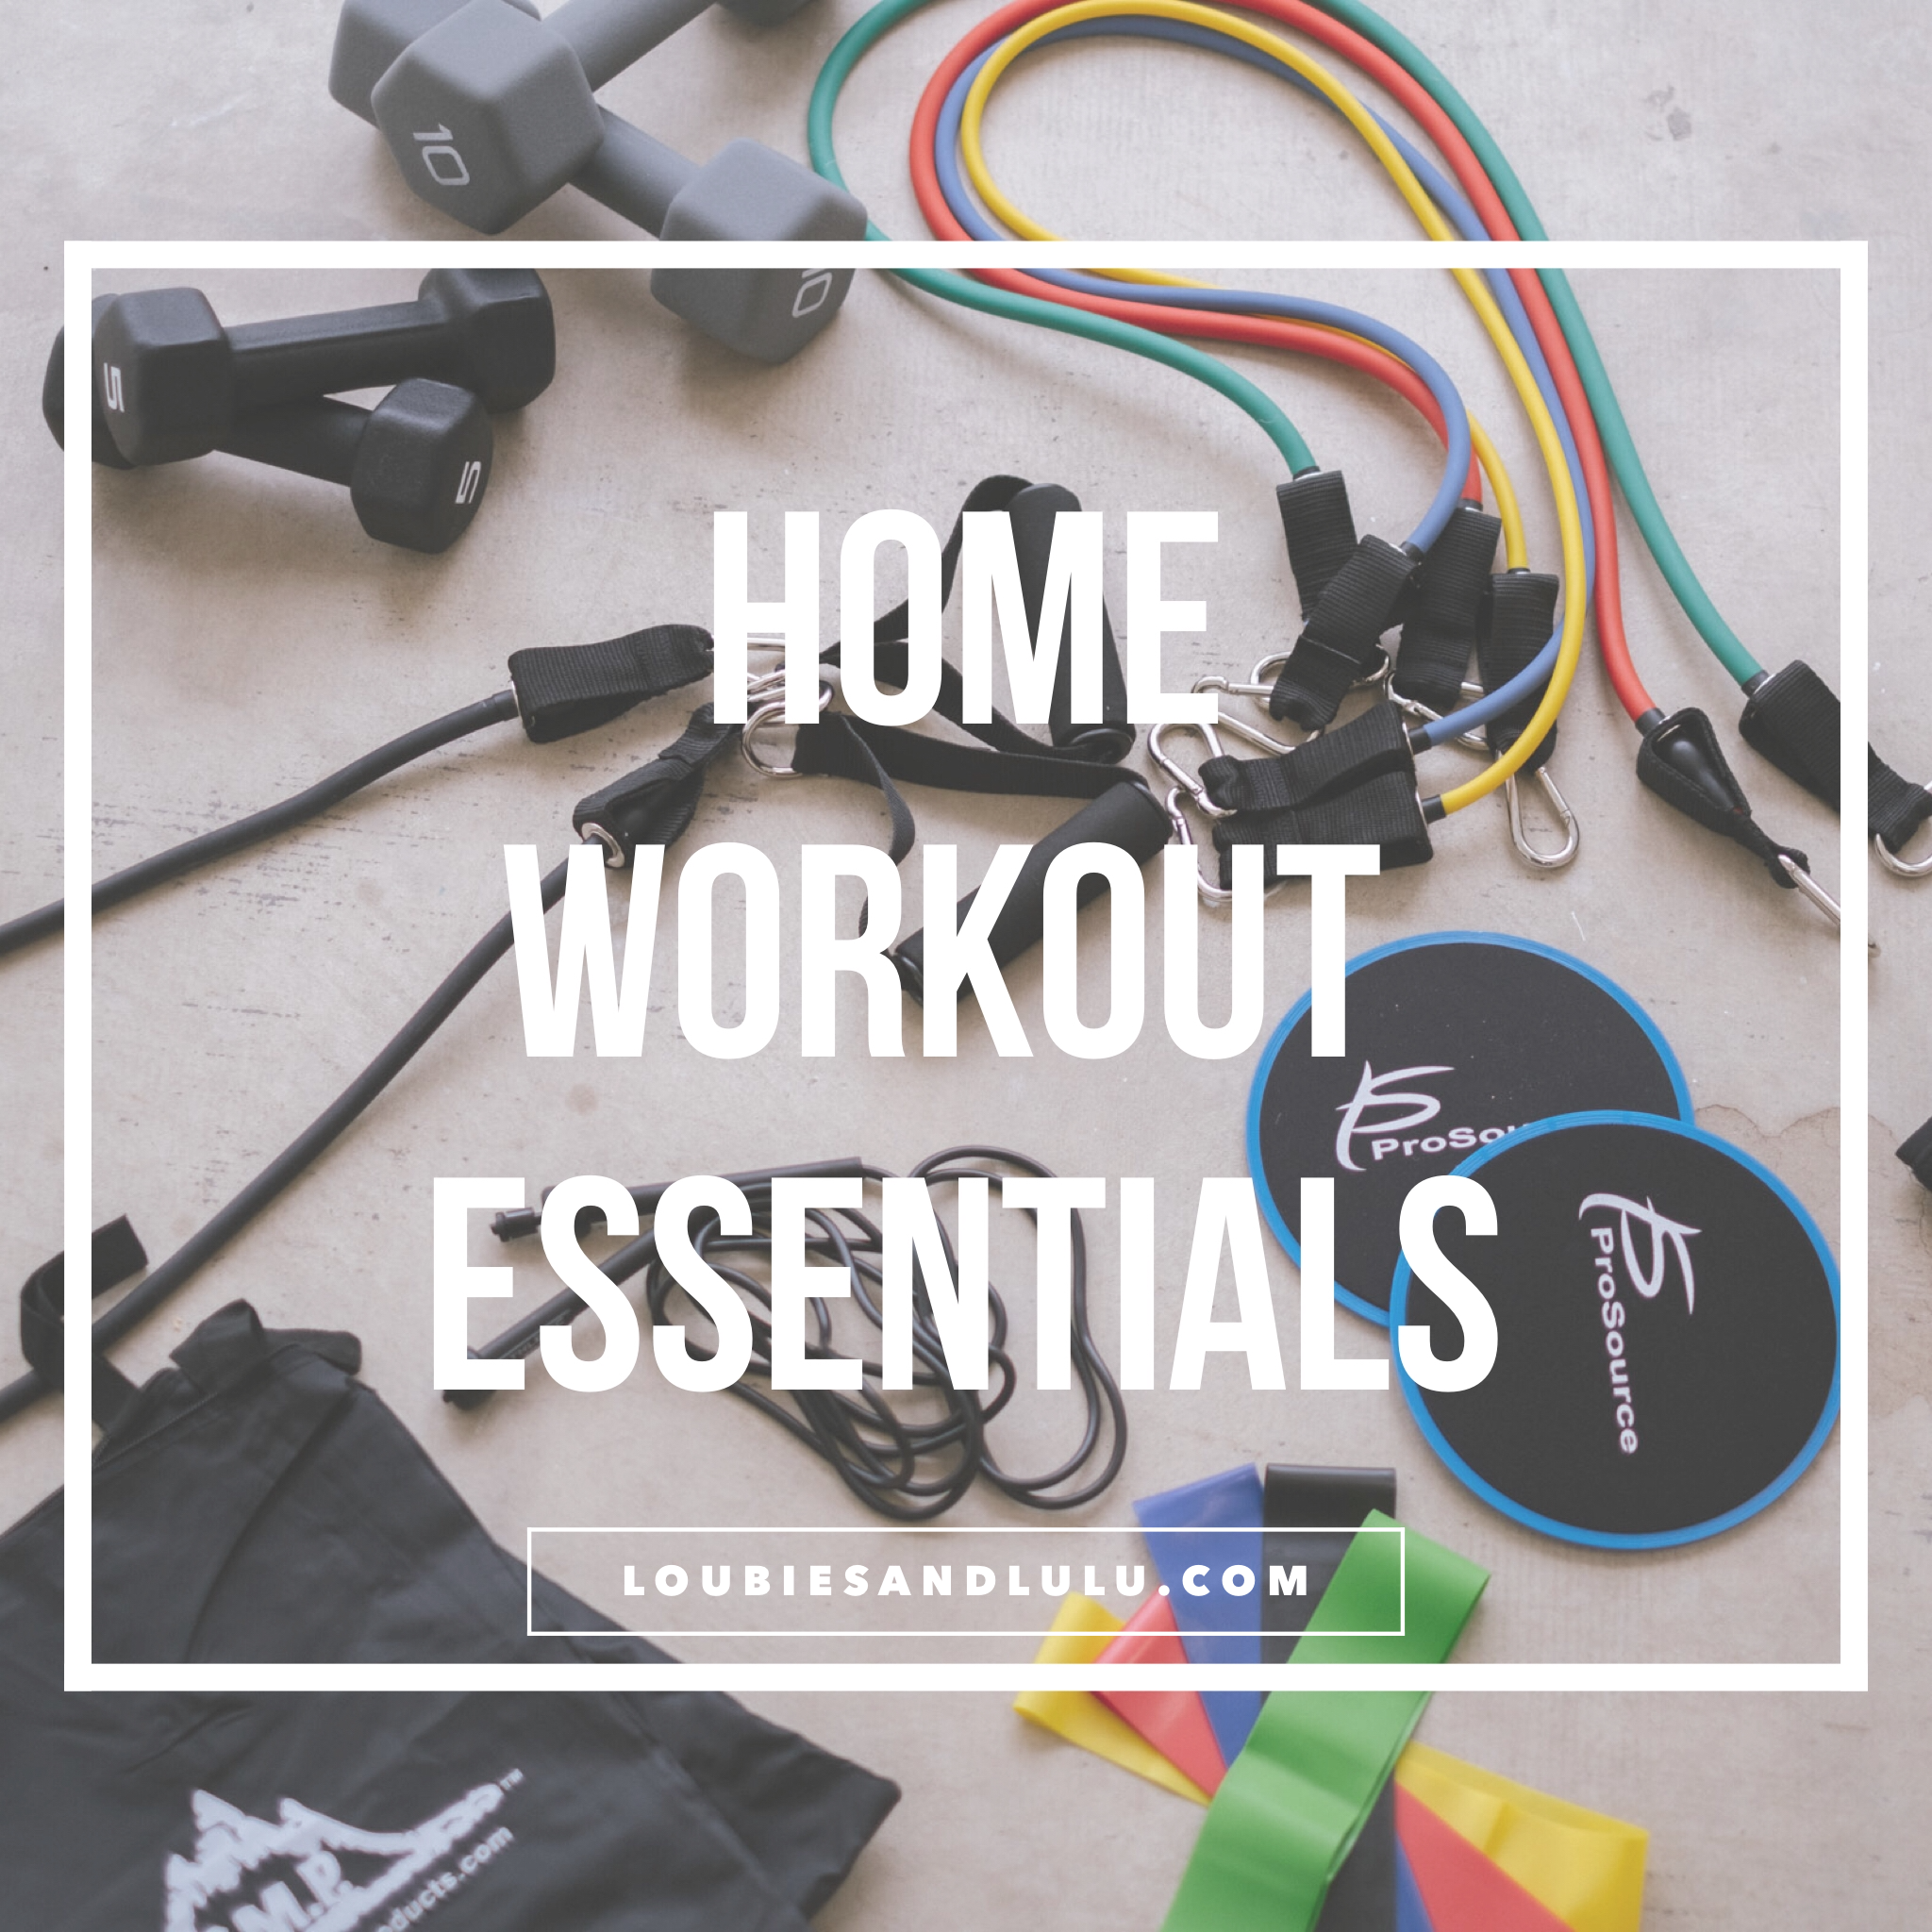 Home workout kit with Walmart